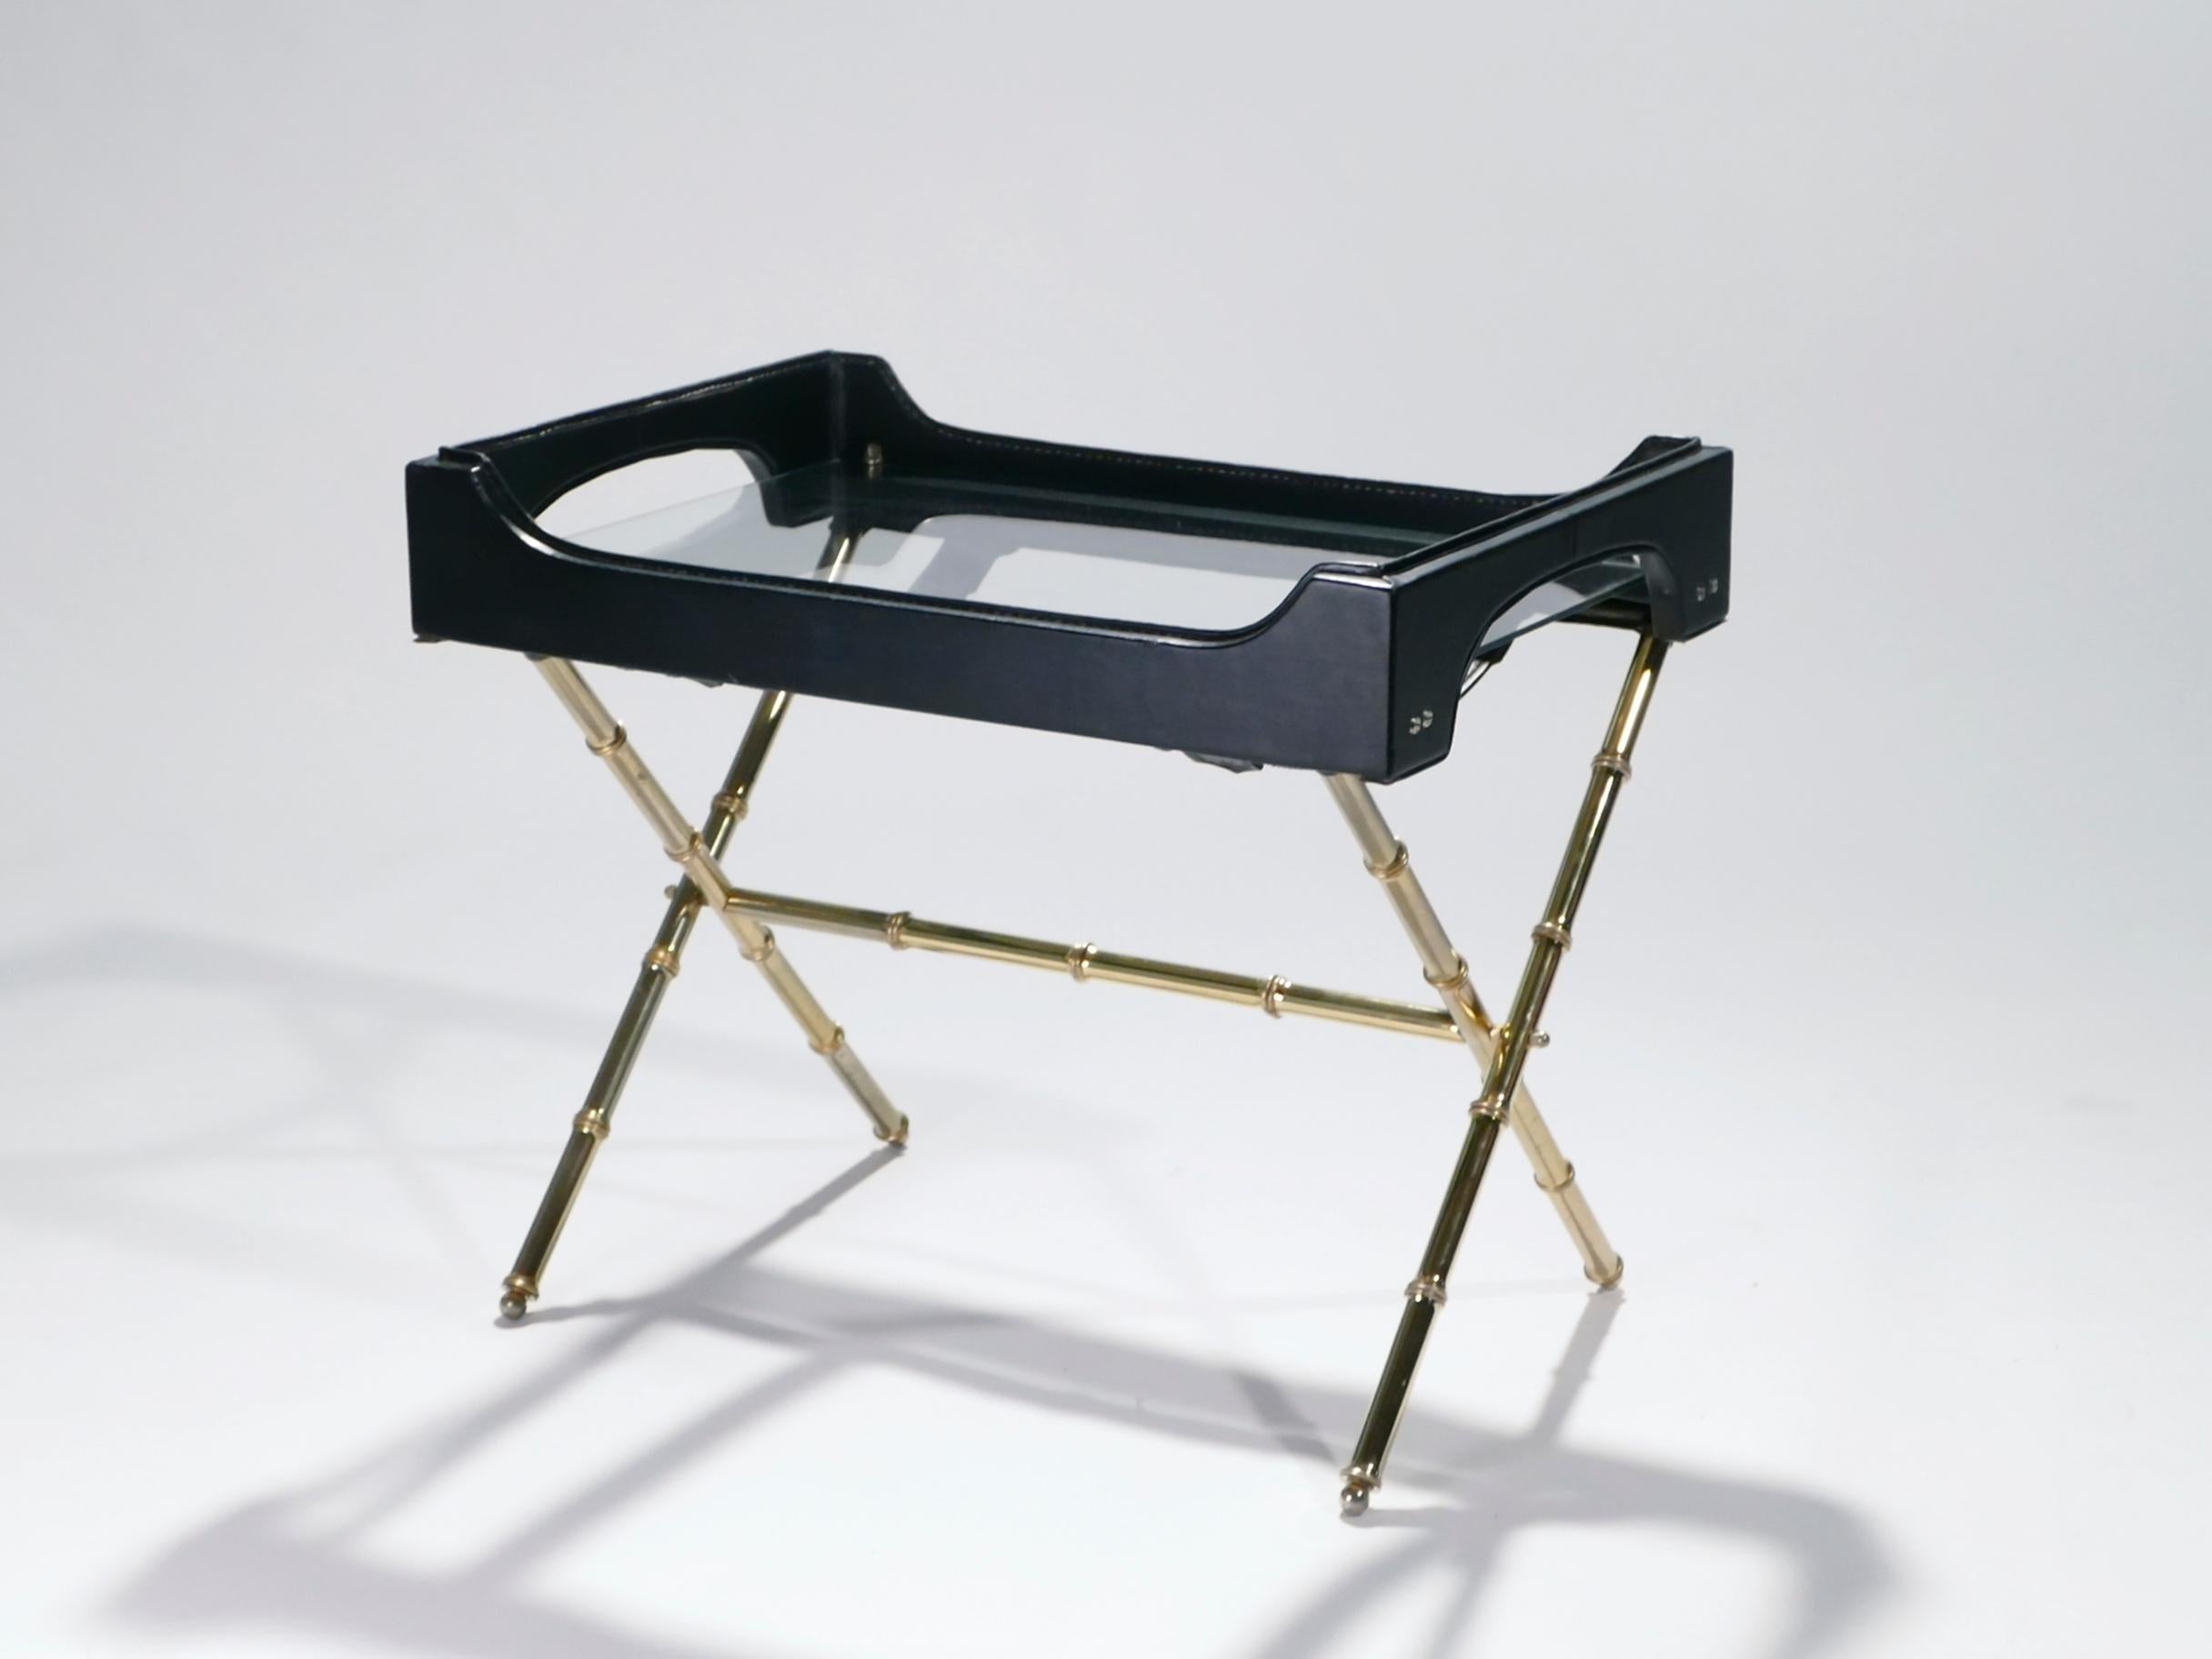 Golden brass and masculine black leather are stunning together in this table by French Art Deco modernist designer Jacques Adnet. The brass structure forms a crossing stand meant to support the accompanying leather tray, which can be removed when